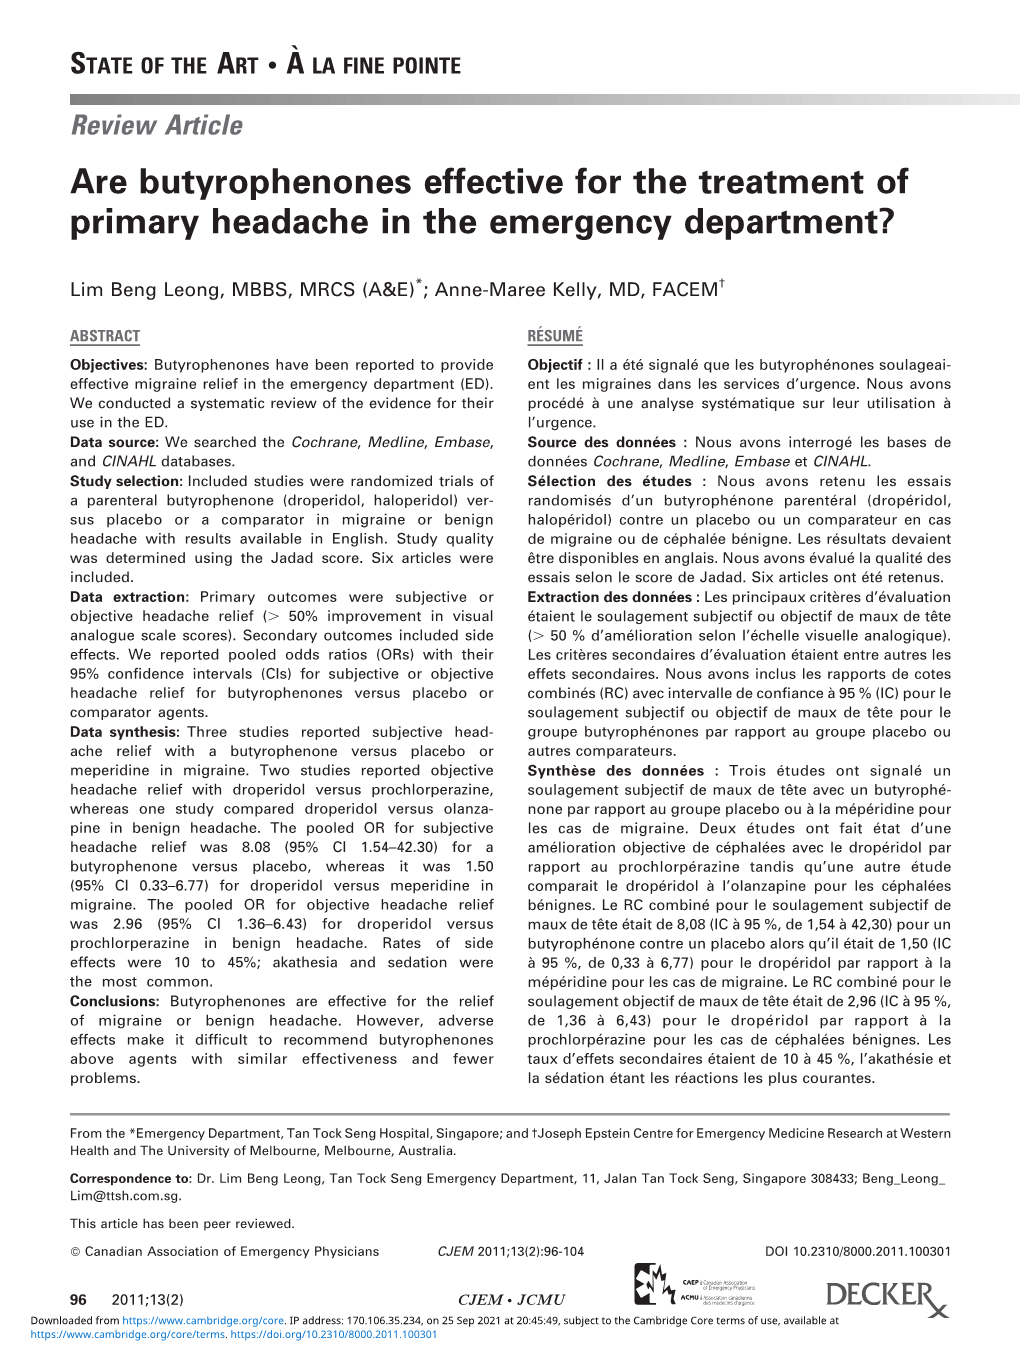 Are Butyrophenones Effective for the Treatment of Primary Headache in the Emergency Department?